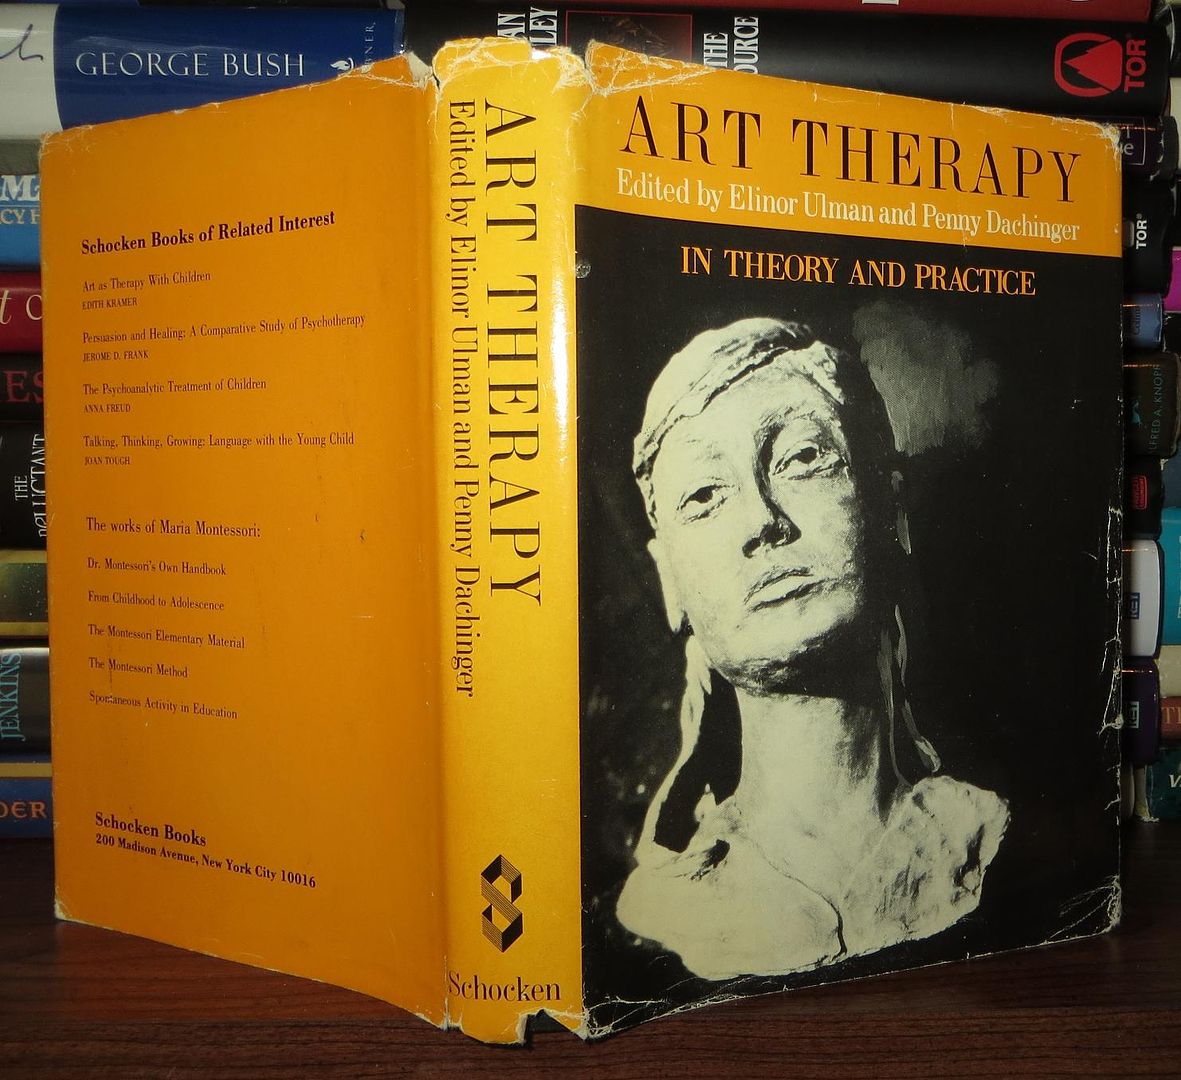 ULMAN, ELINOR & PENNY DACHINGER - Art Therapy in Theory and Practice